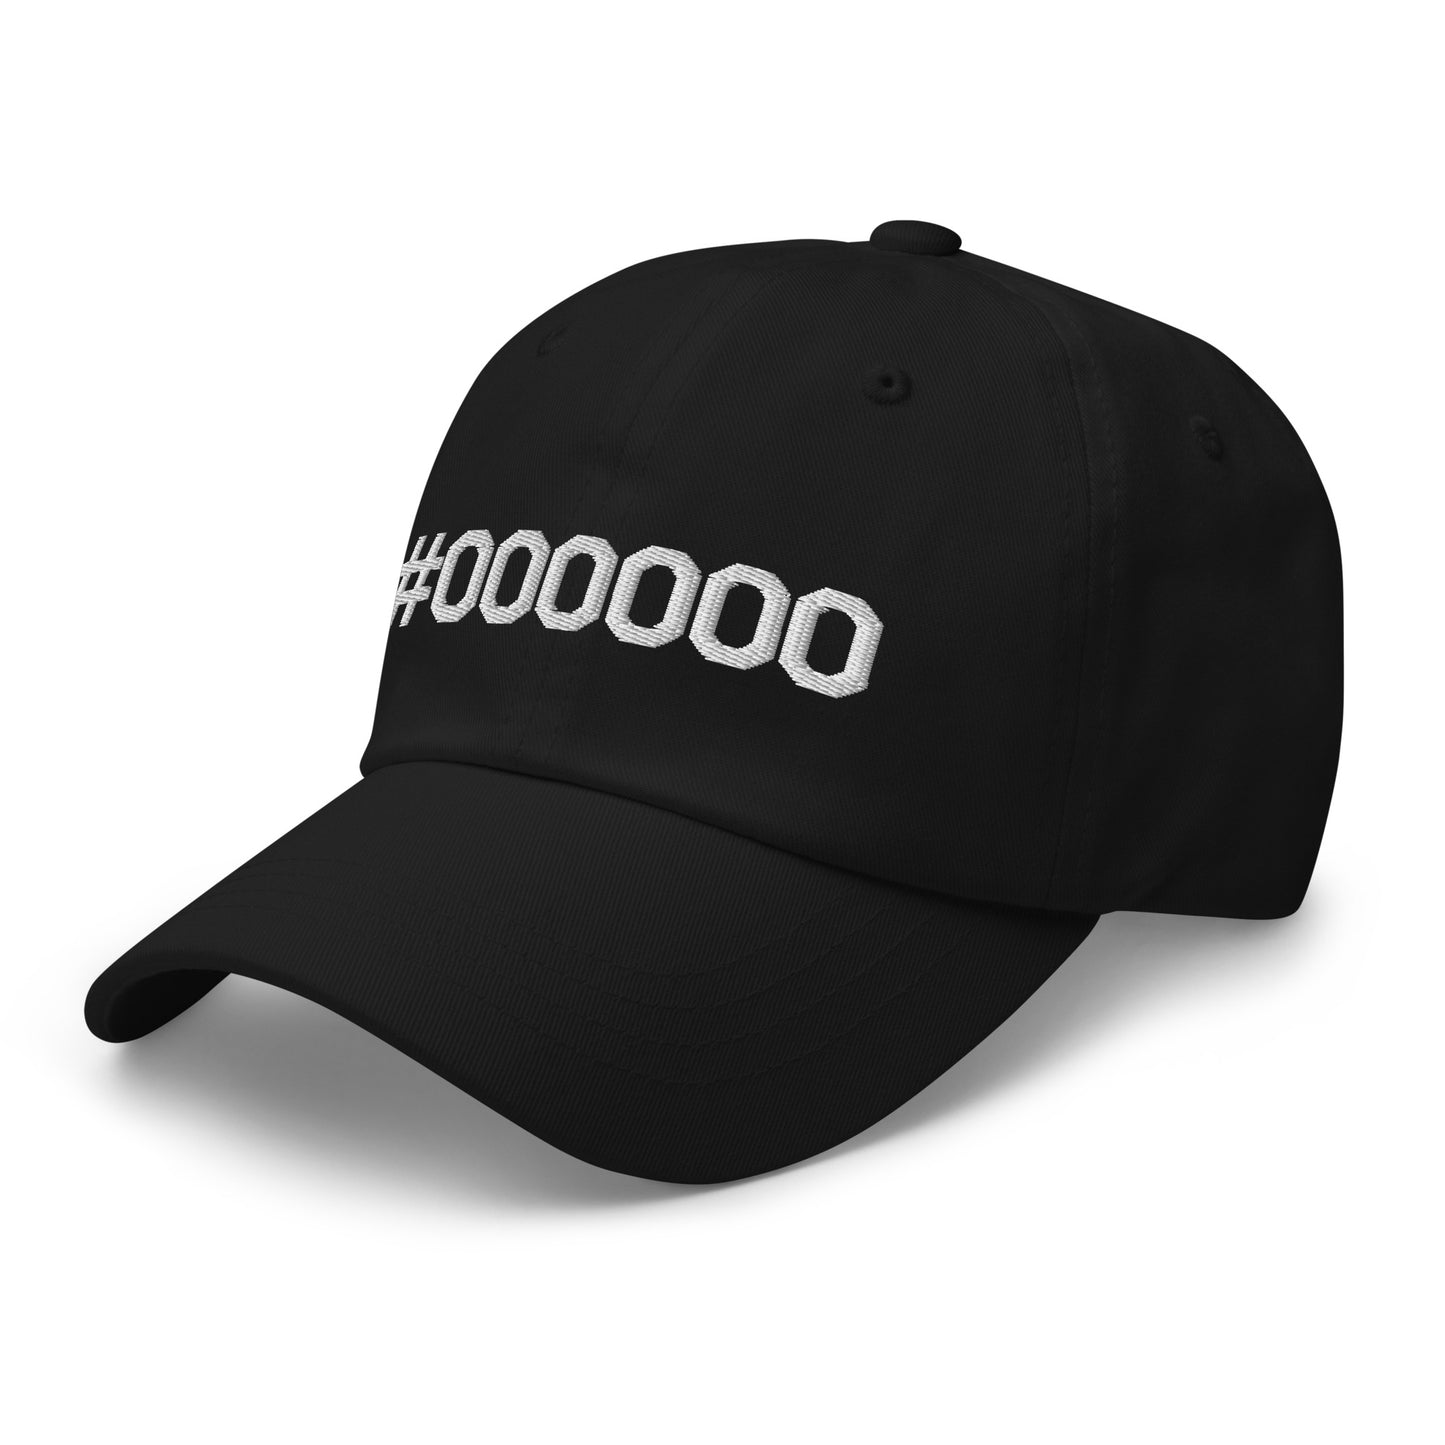 #000000 Embroidered Dad hat